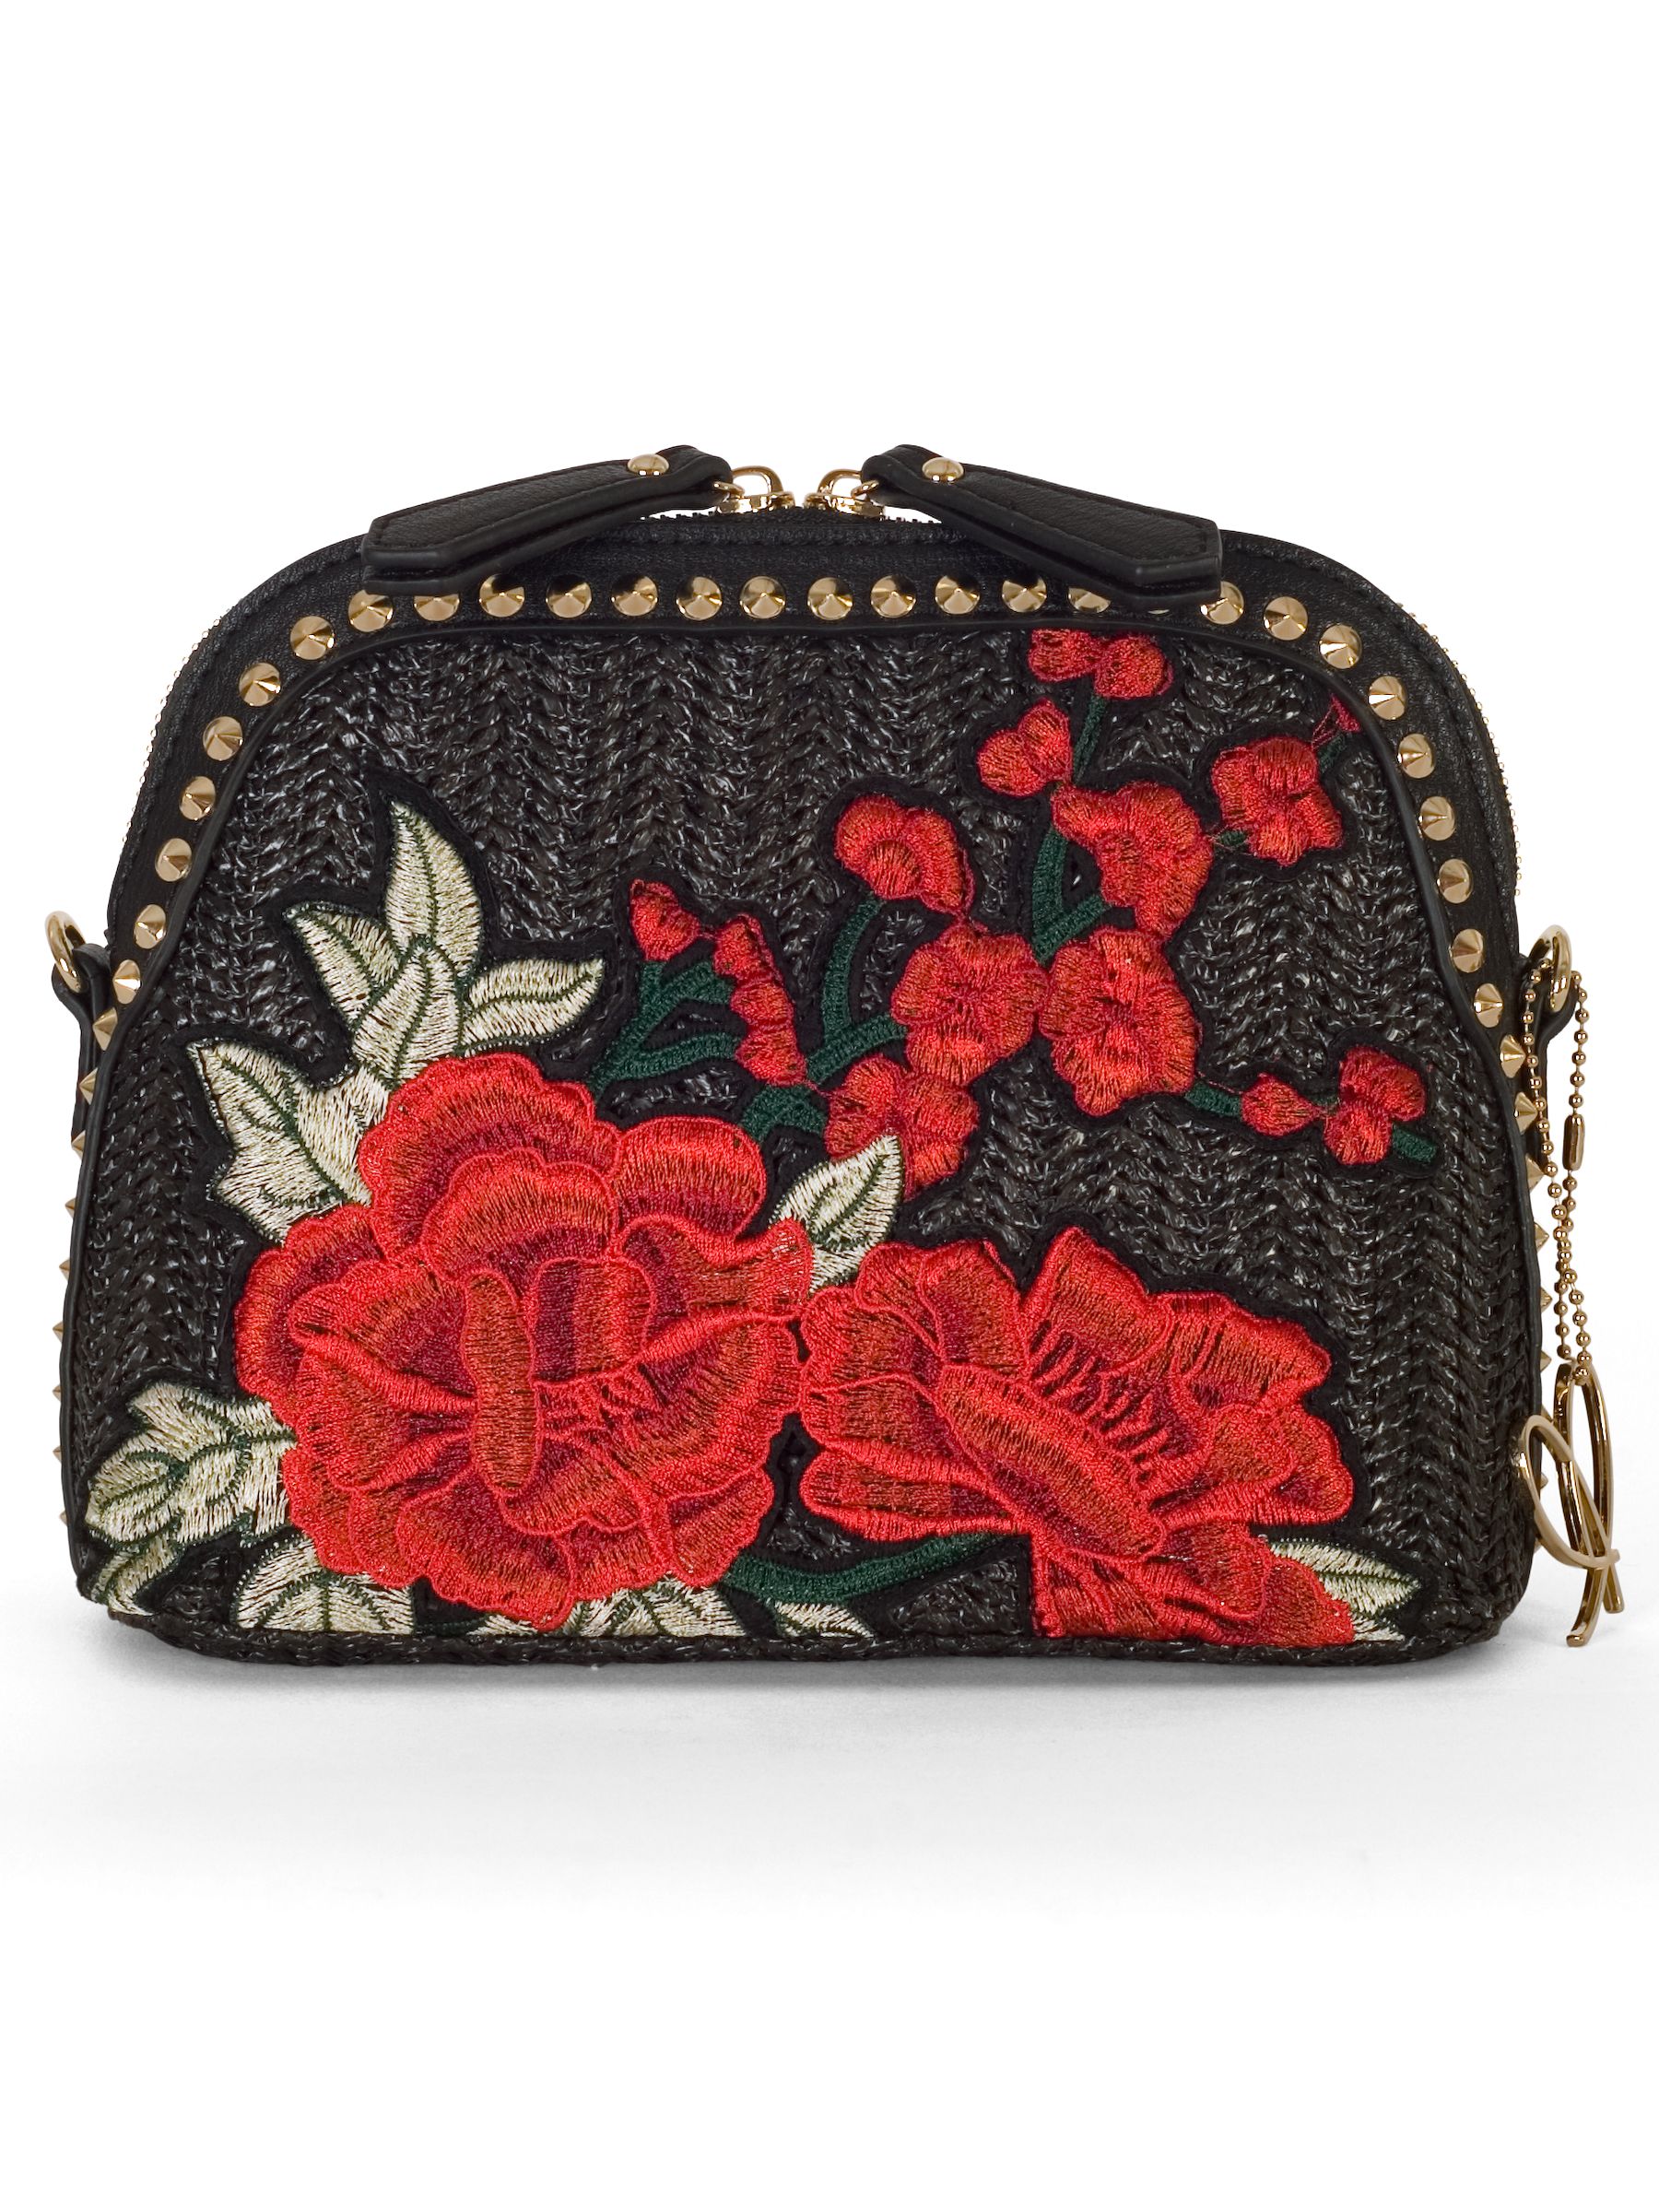 Chesca Rose Embroidered Cross Body Bag, Black/Red